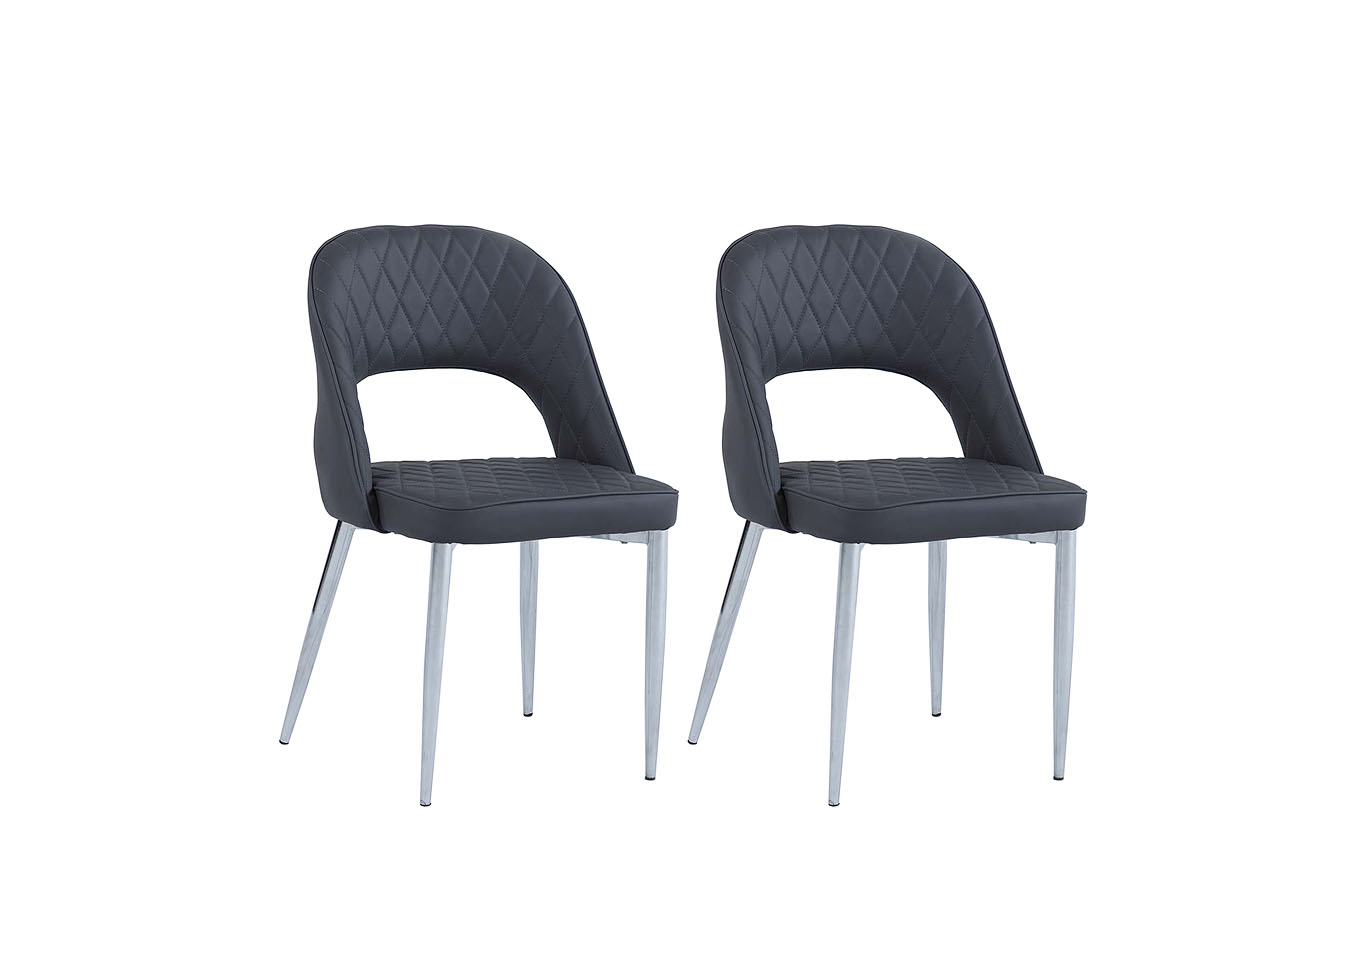 Samantha Grey Open-Back Upholstered Chair (Set of 2),Chintaly Imports